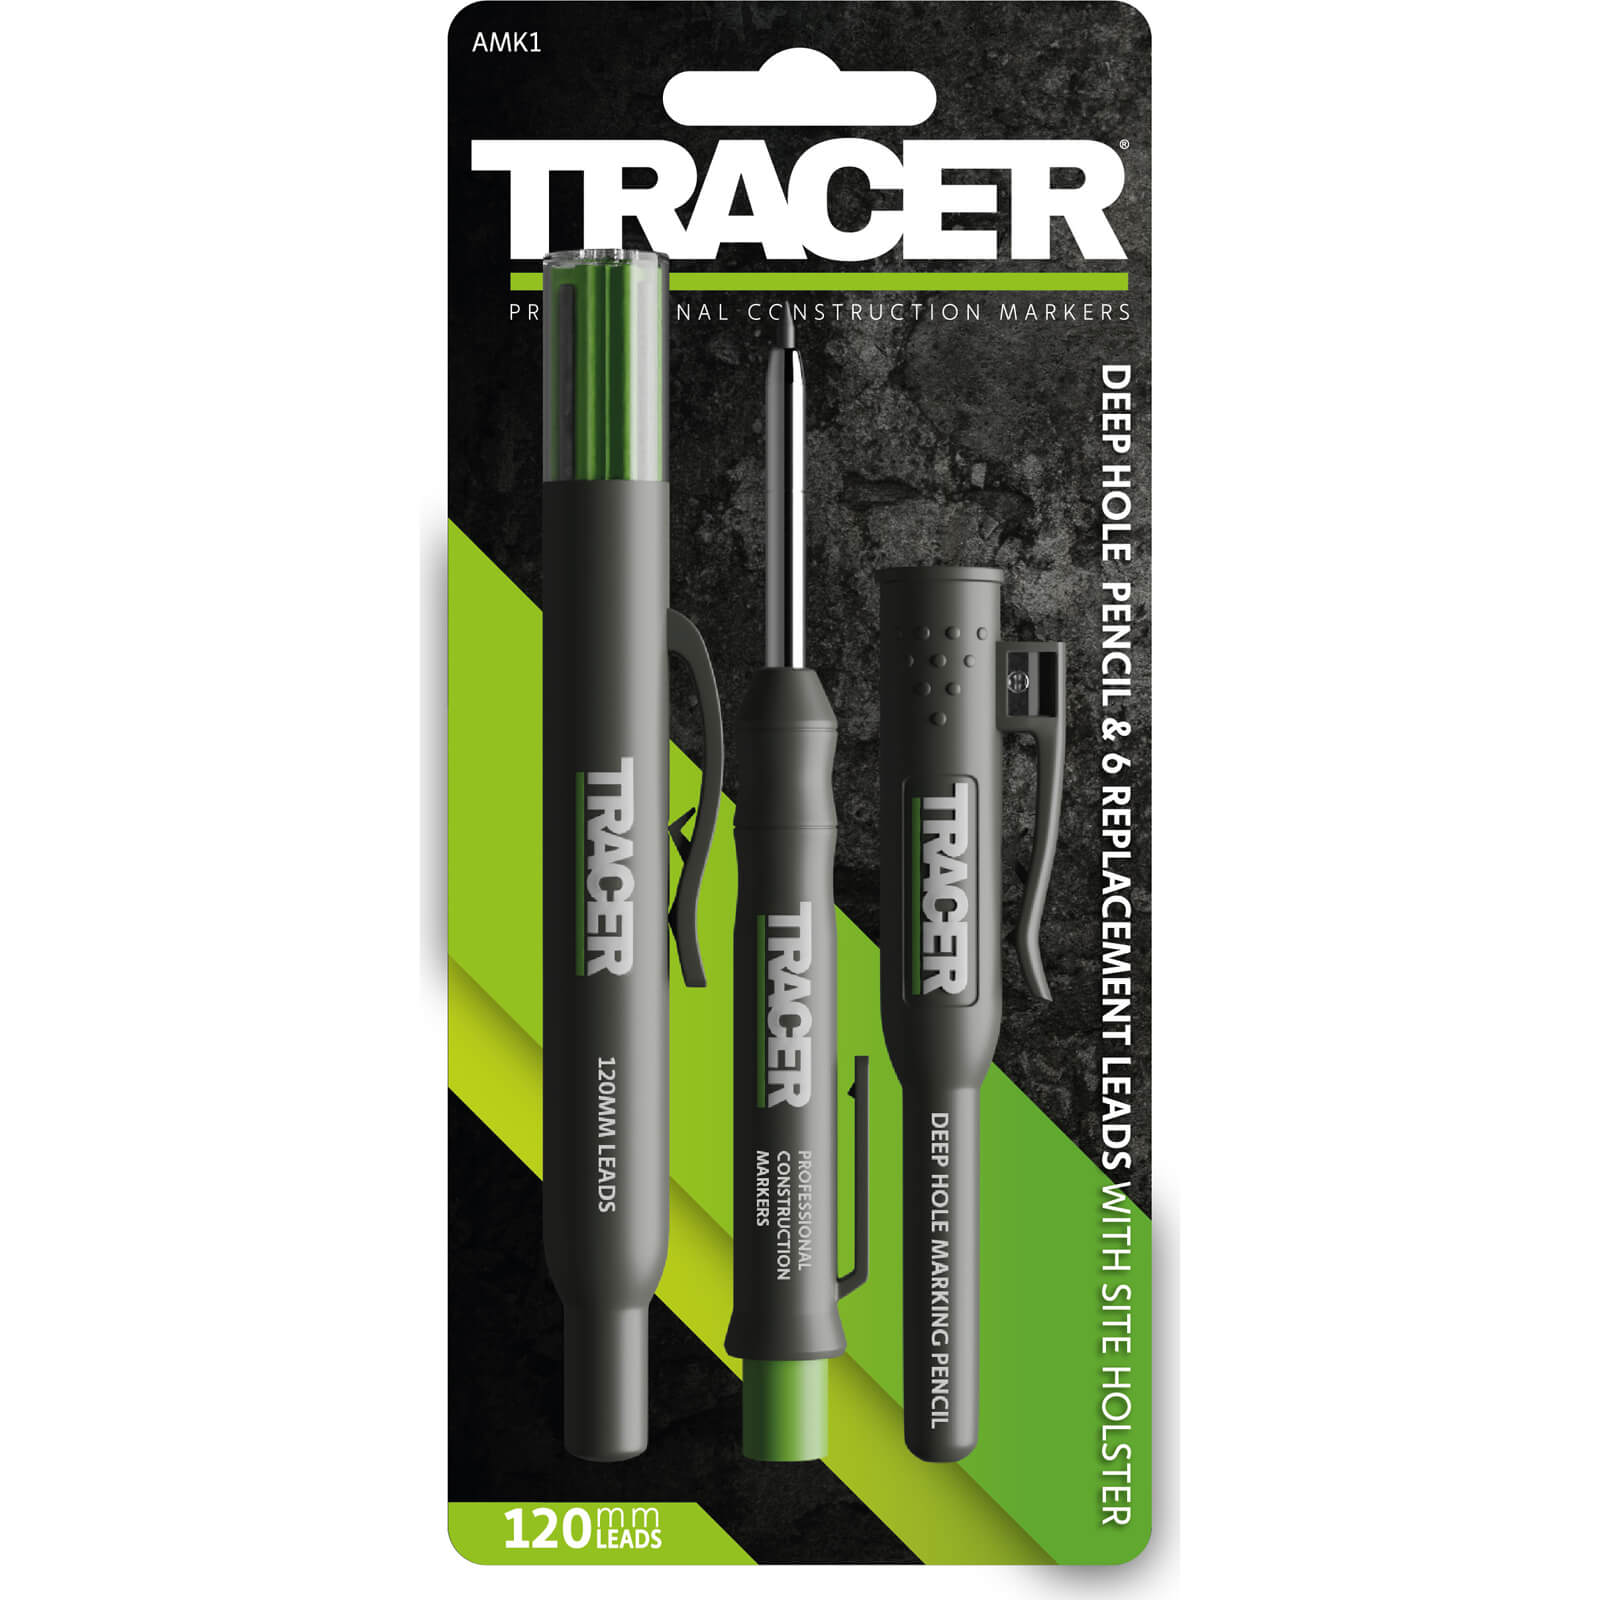 Image of Tracer Deep Pencil Marker and Replacement Leads